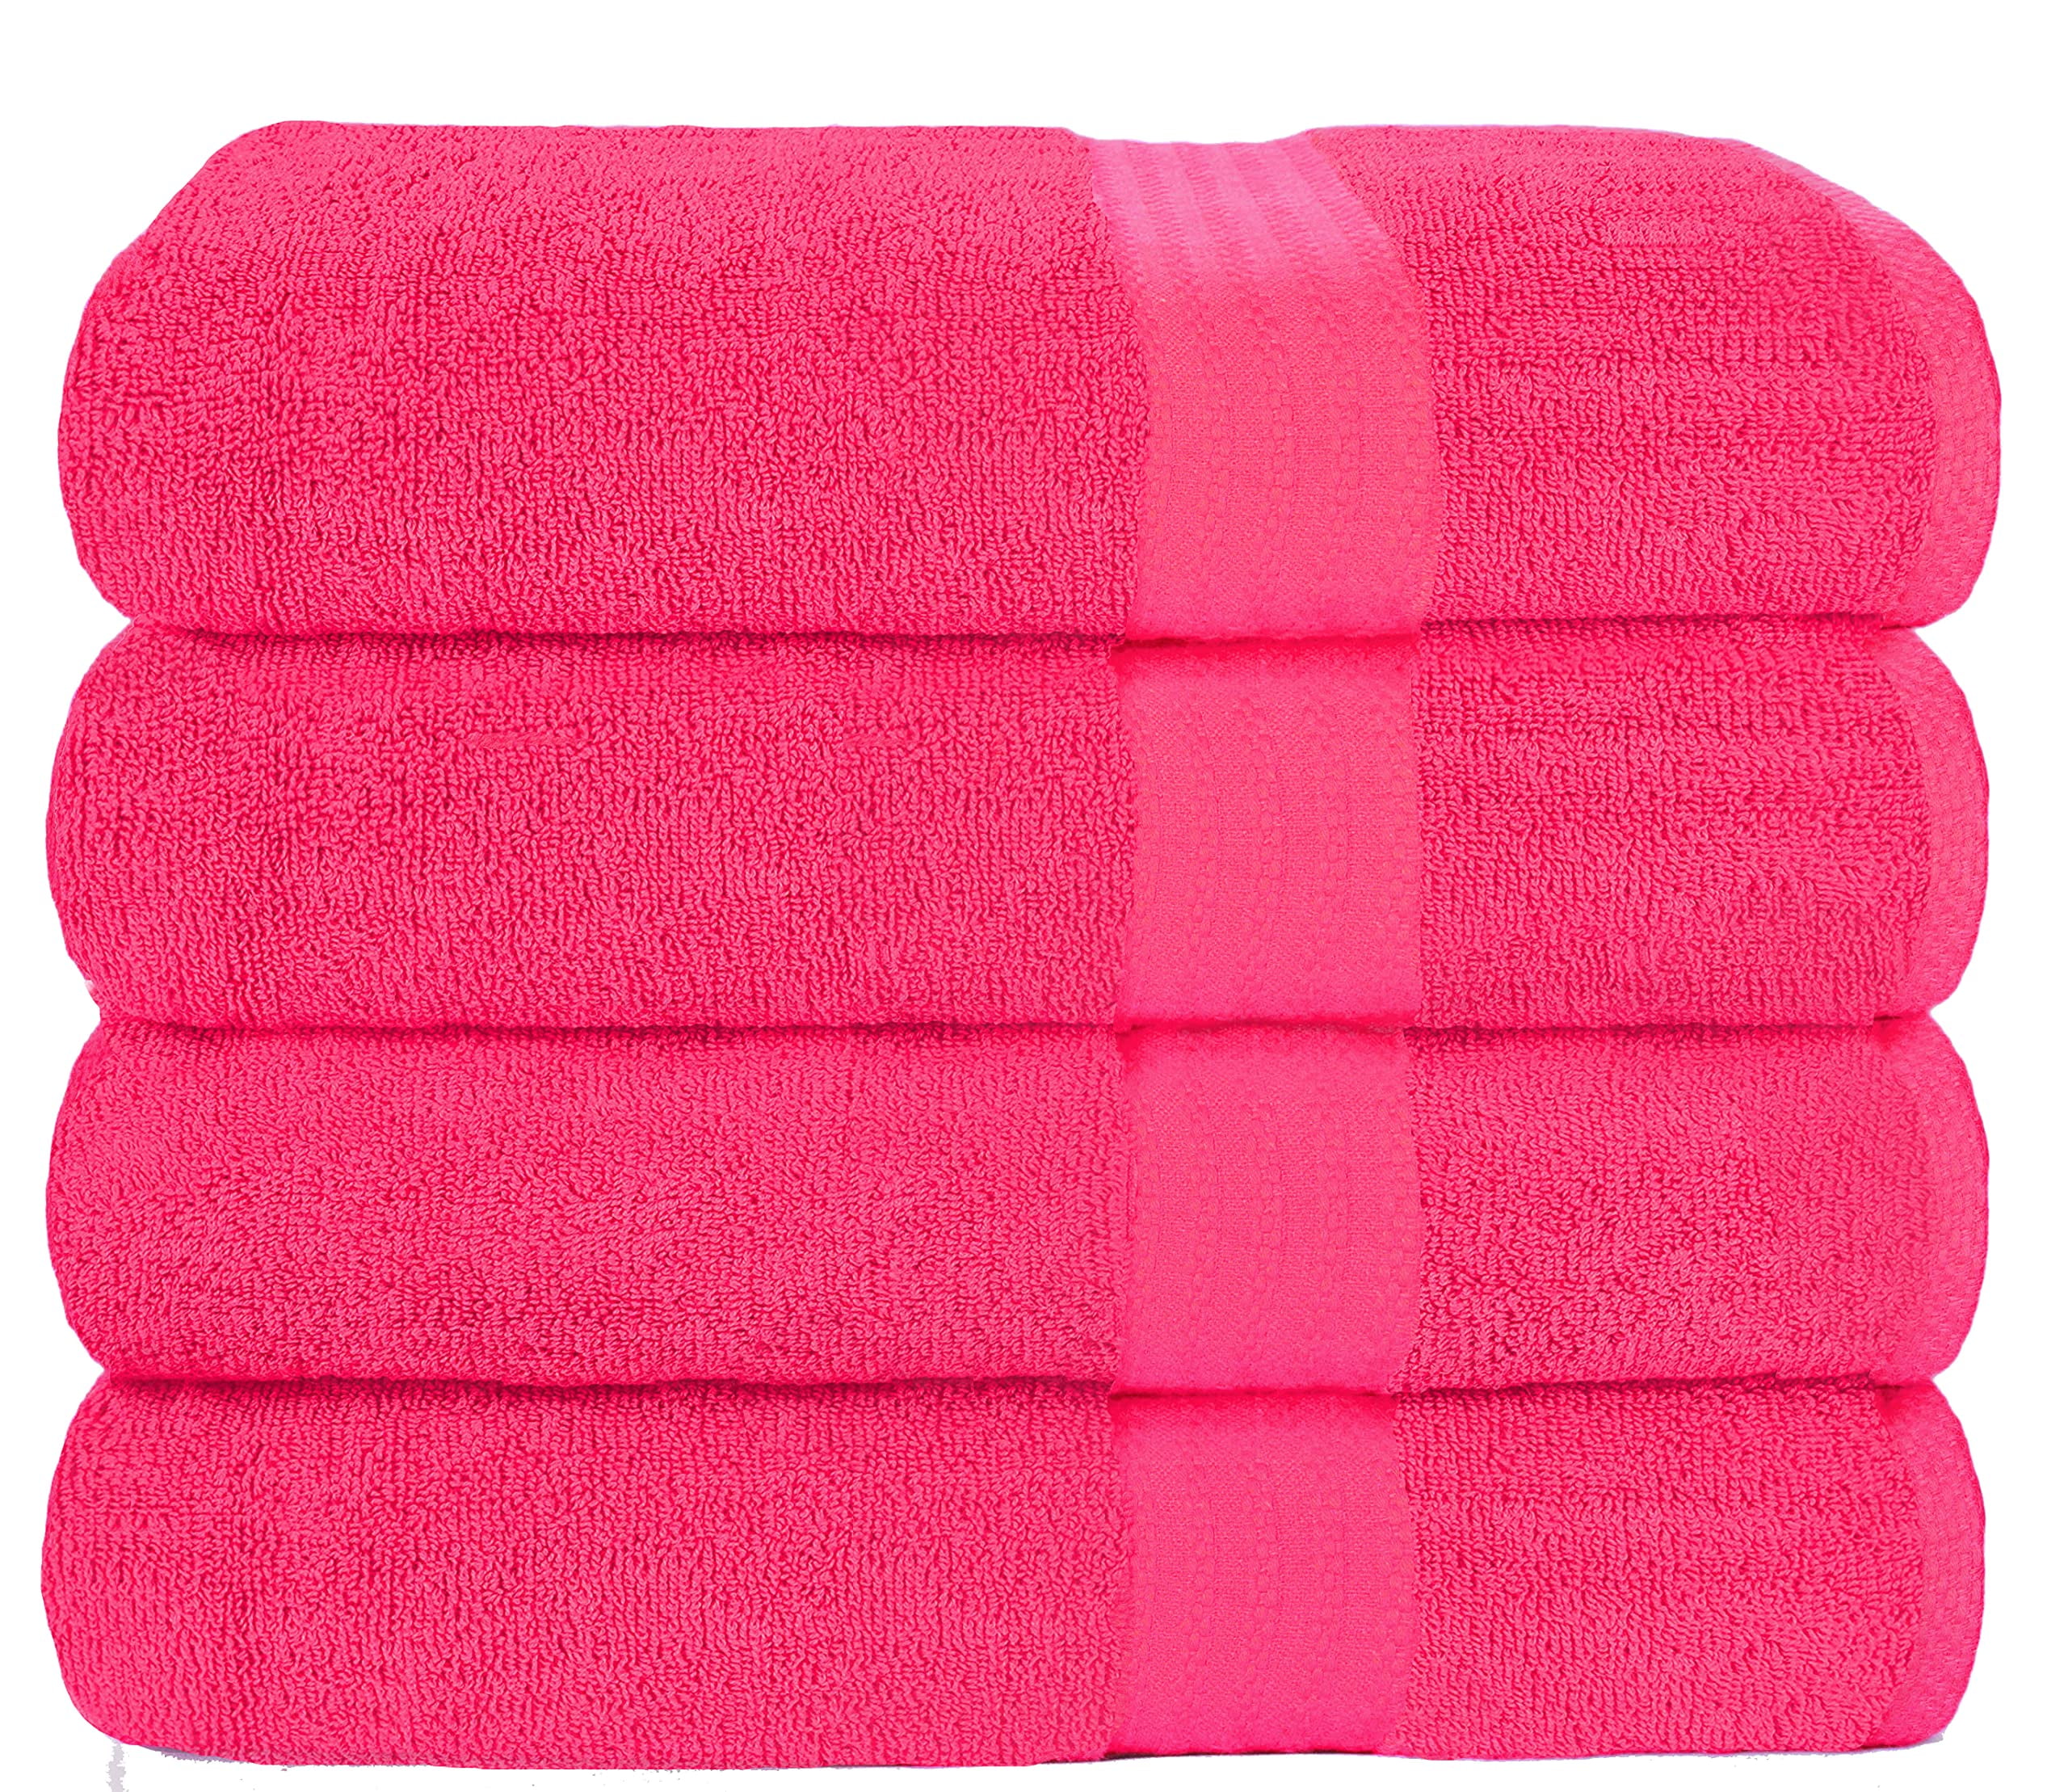 100% Cotton Bath Towels Pack of 4 - Extra Plush & Absorbent Hot Pink Bath  Towels - 56 x 28 - 650 GSM